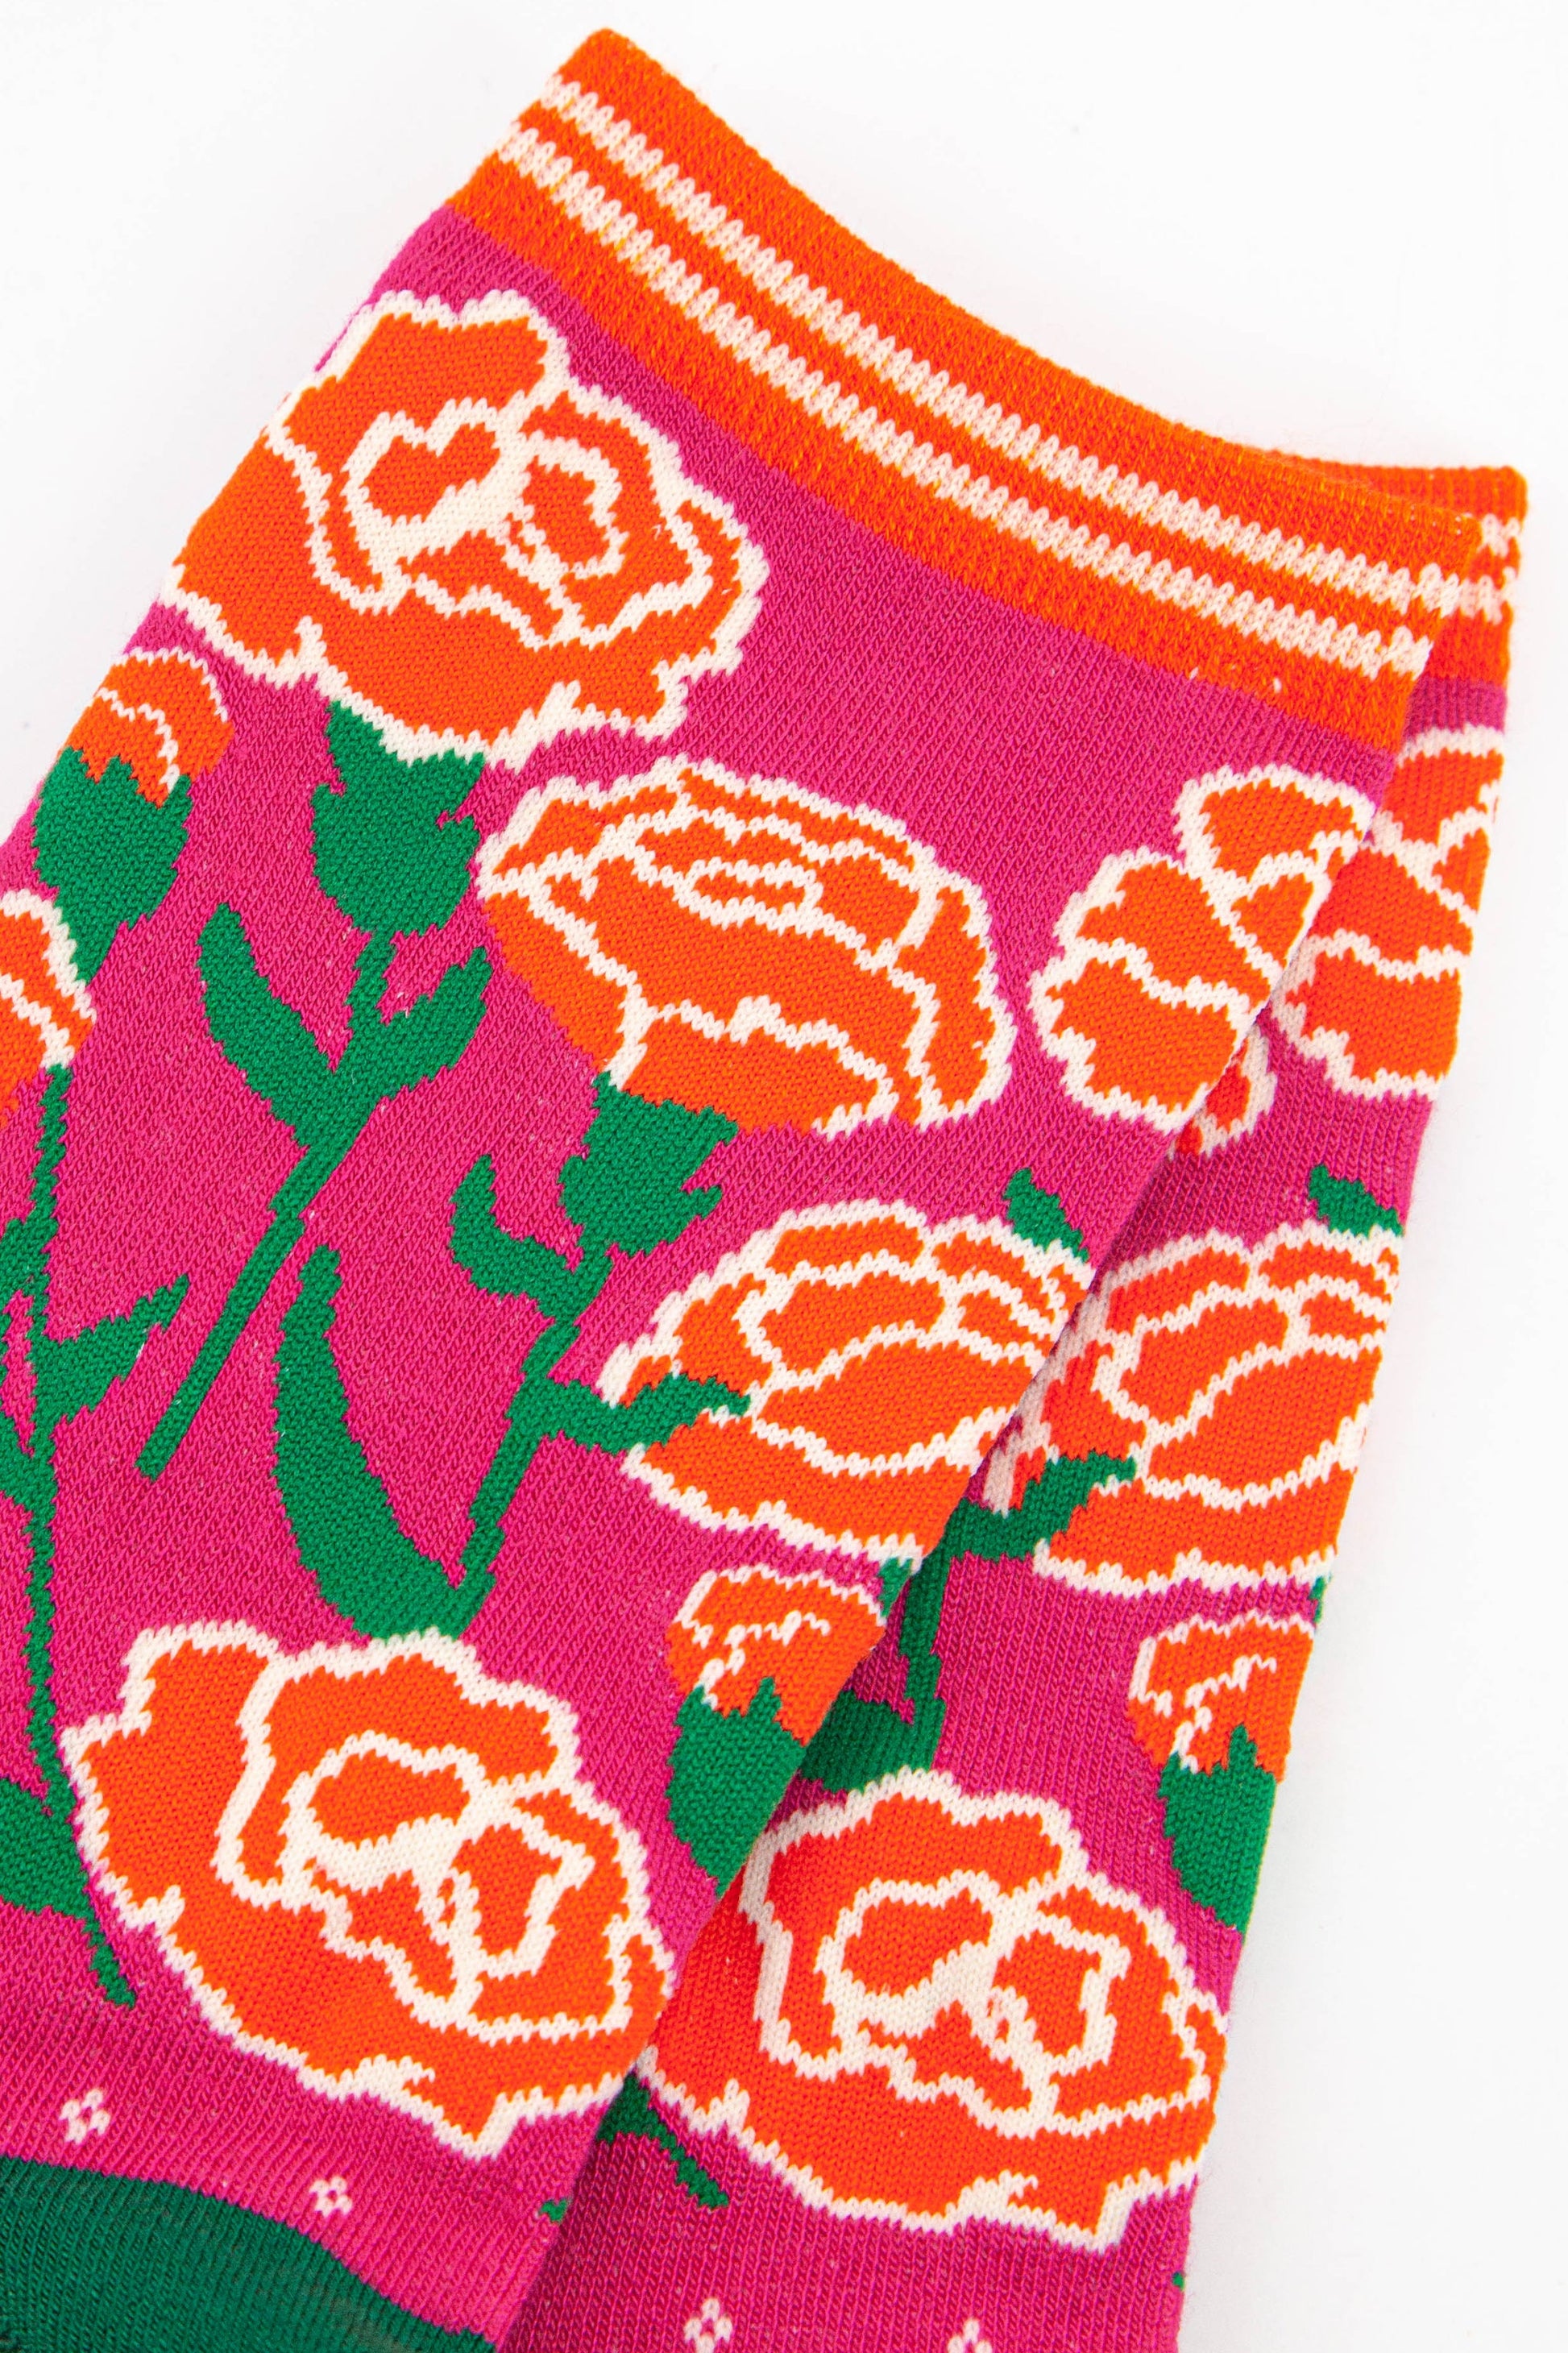 close up of the carnation floral design on the ankle of the socks